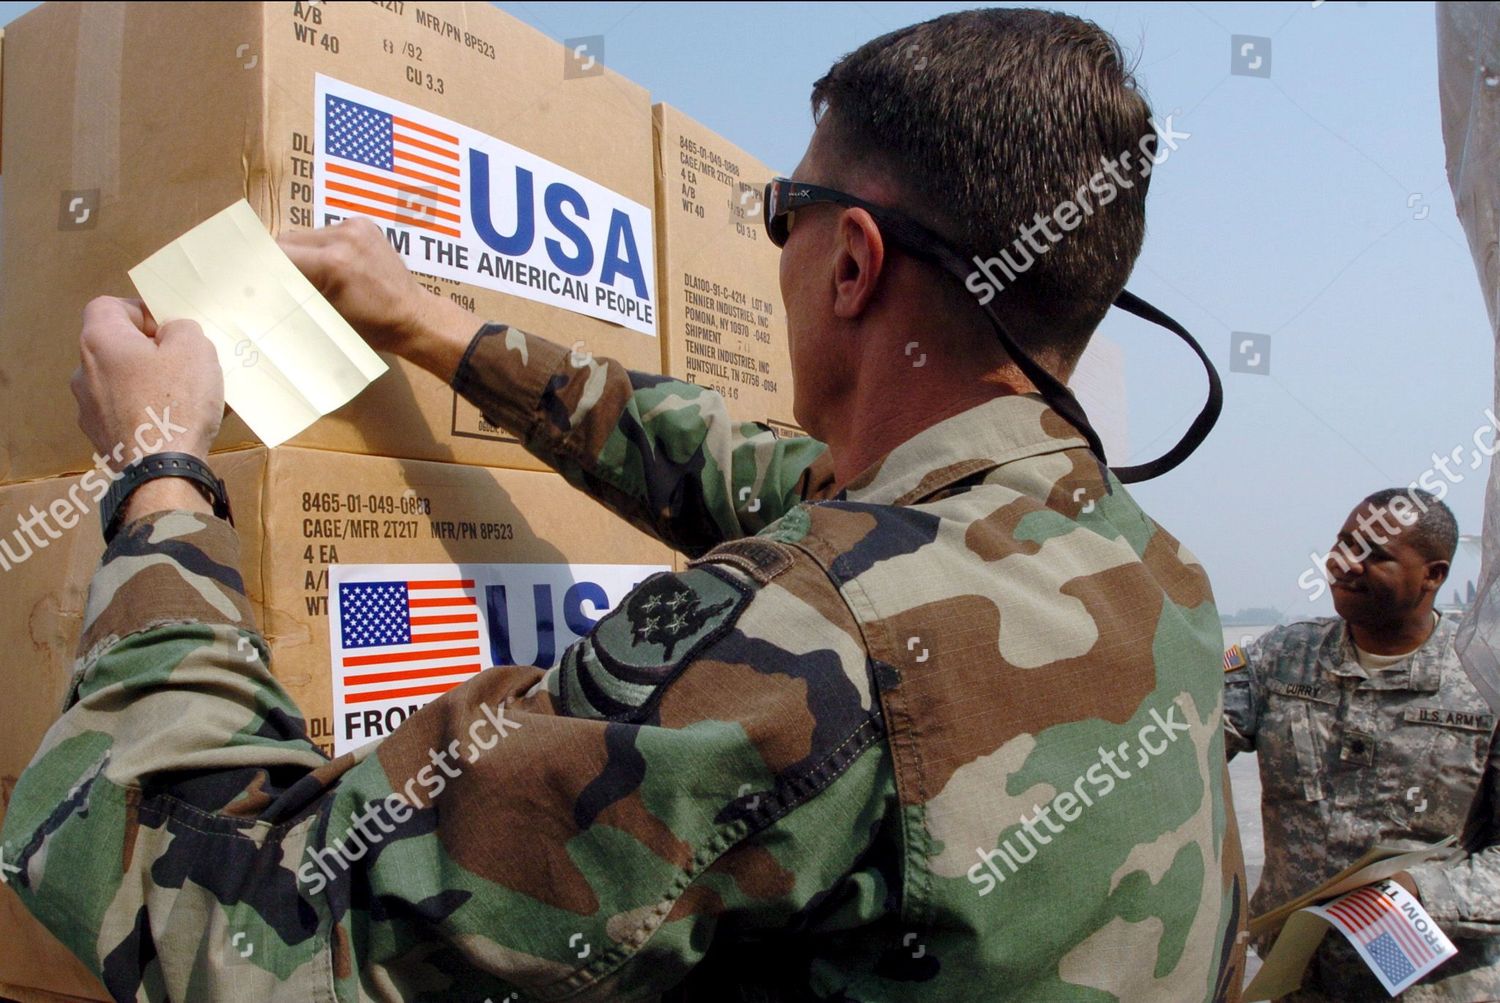 Us Military Personnel Put Stickers On Editorial Stock Photo - Stock Image |  Shutterstock